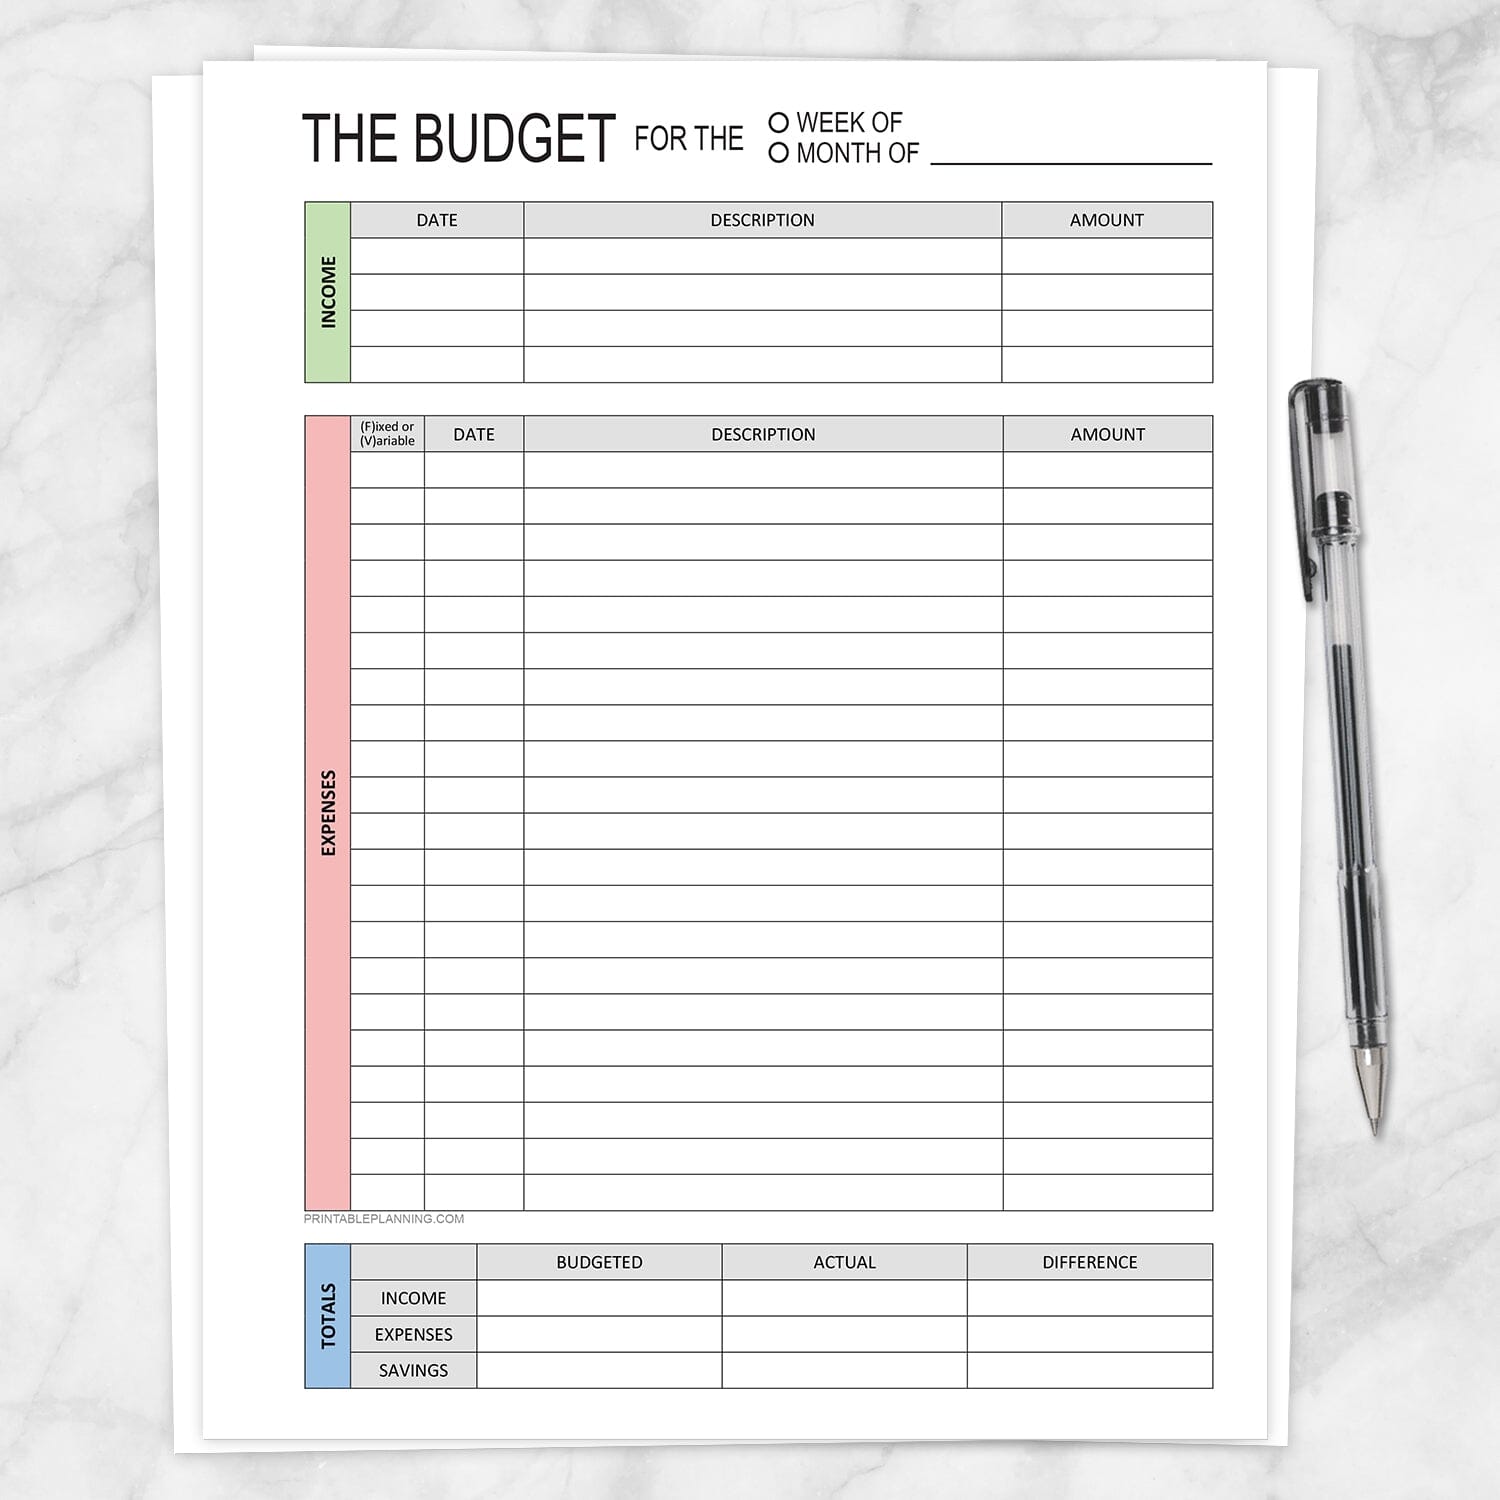 Budget Worksheet - Weekly or Monthly, Green Red Blue - Printable